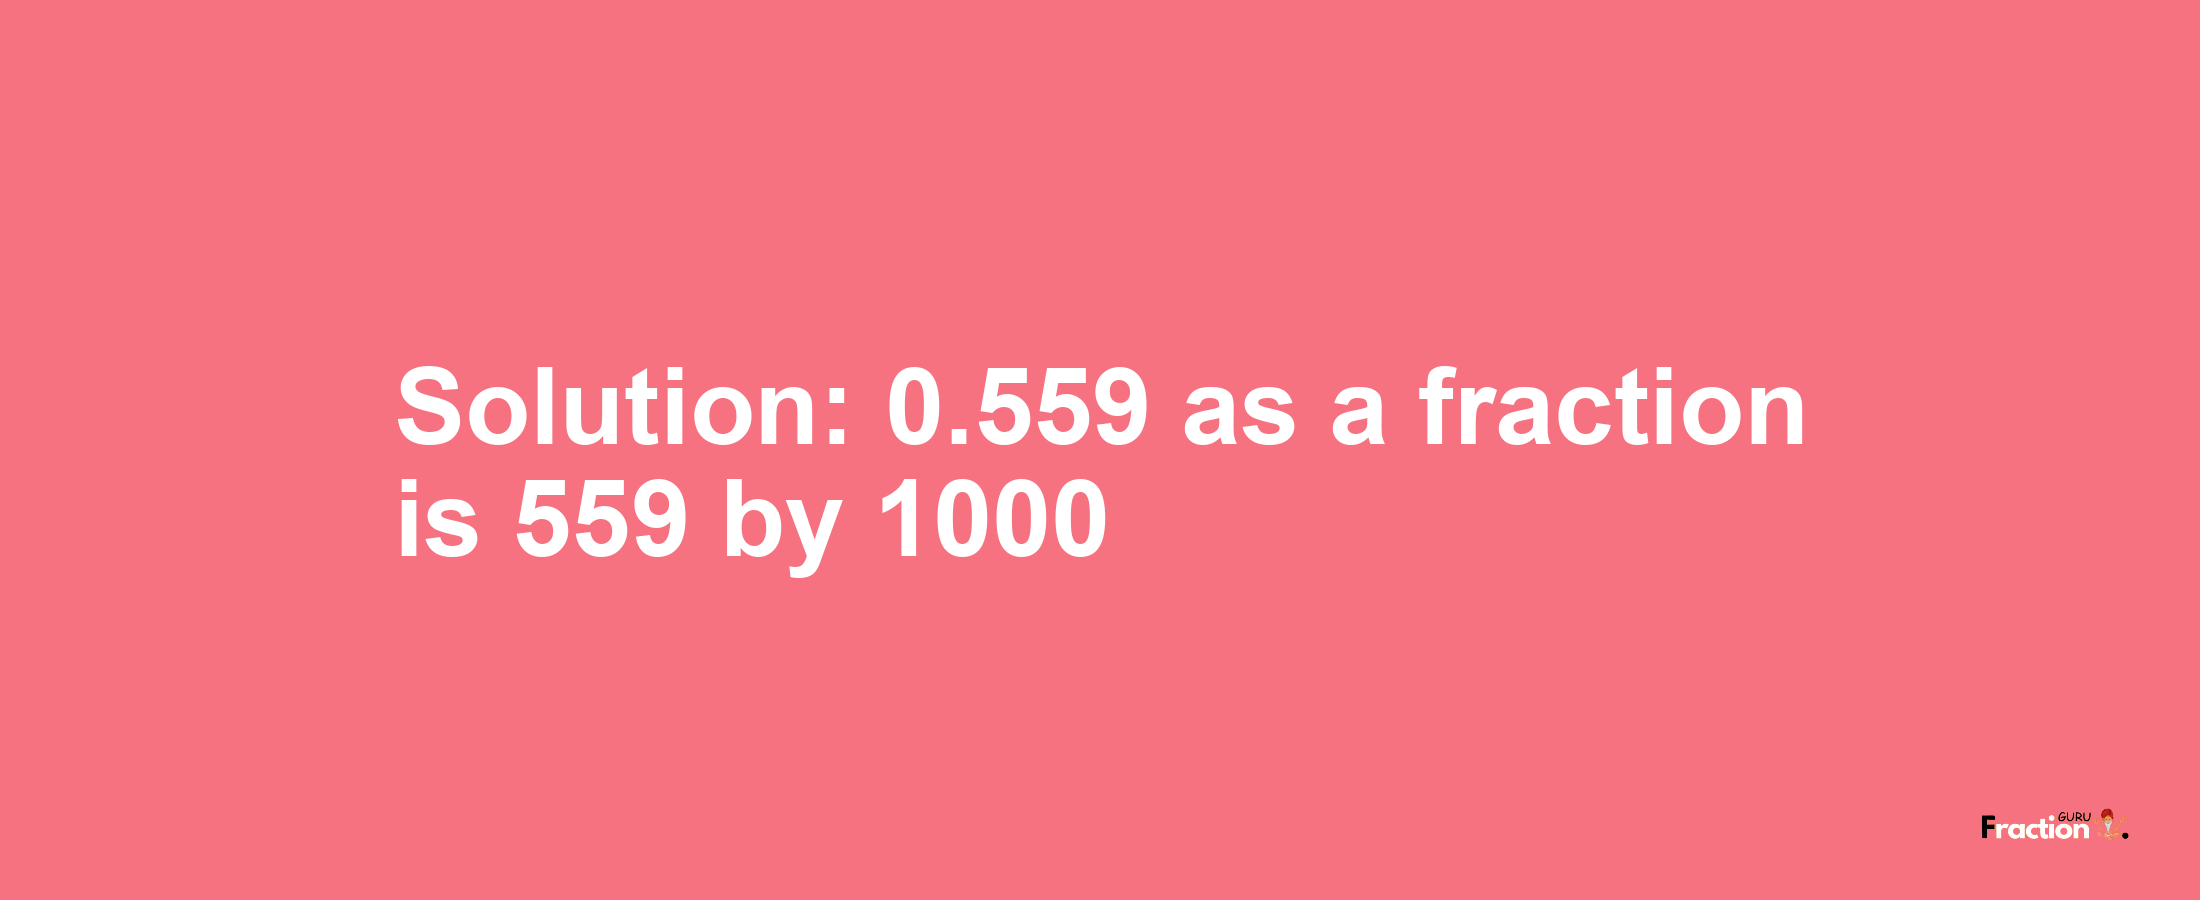 Solution:0.559 as a fraction is 559/1000